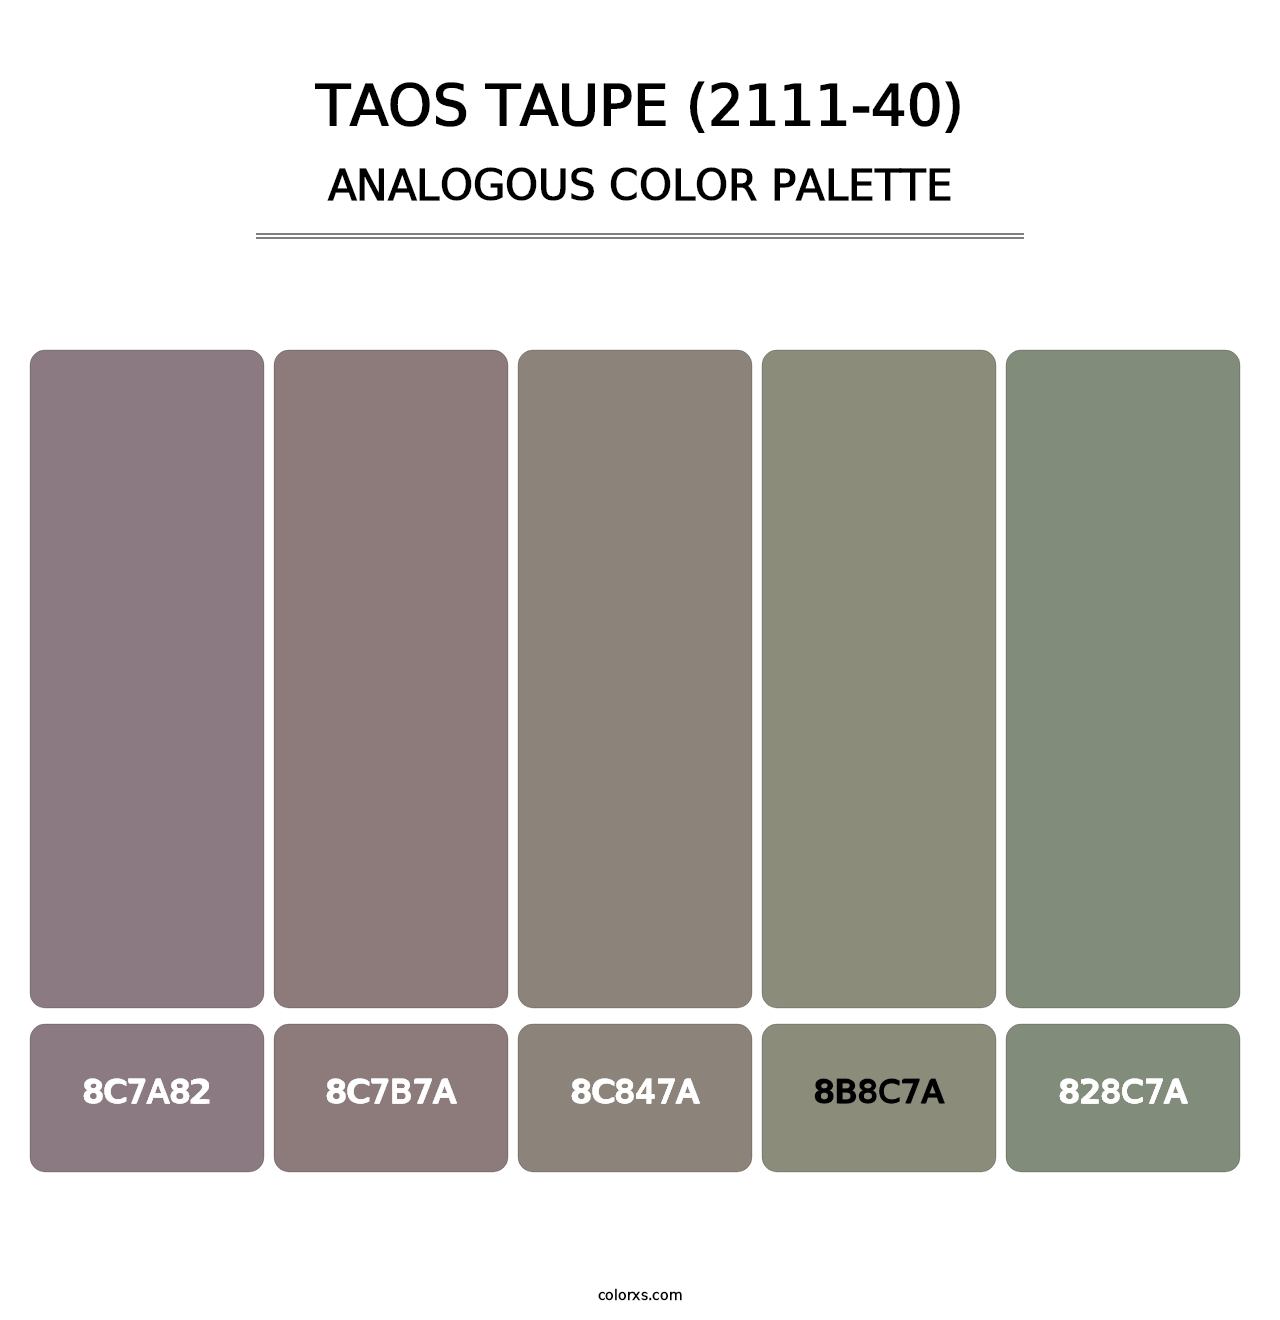 Taos Taupe (2111-40) - Analogous Color Palette